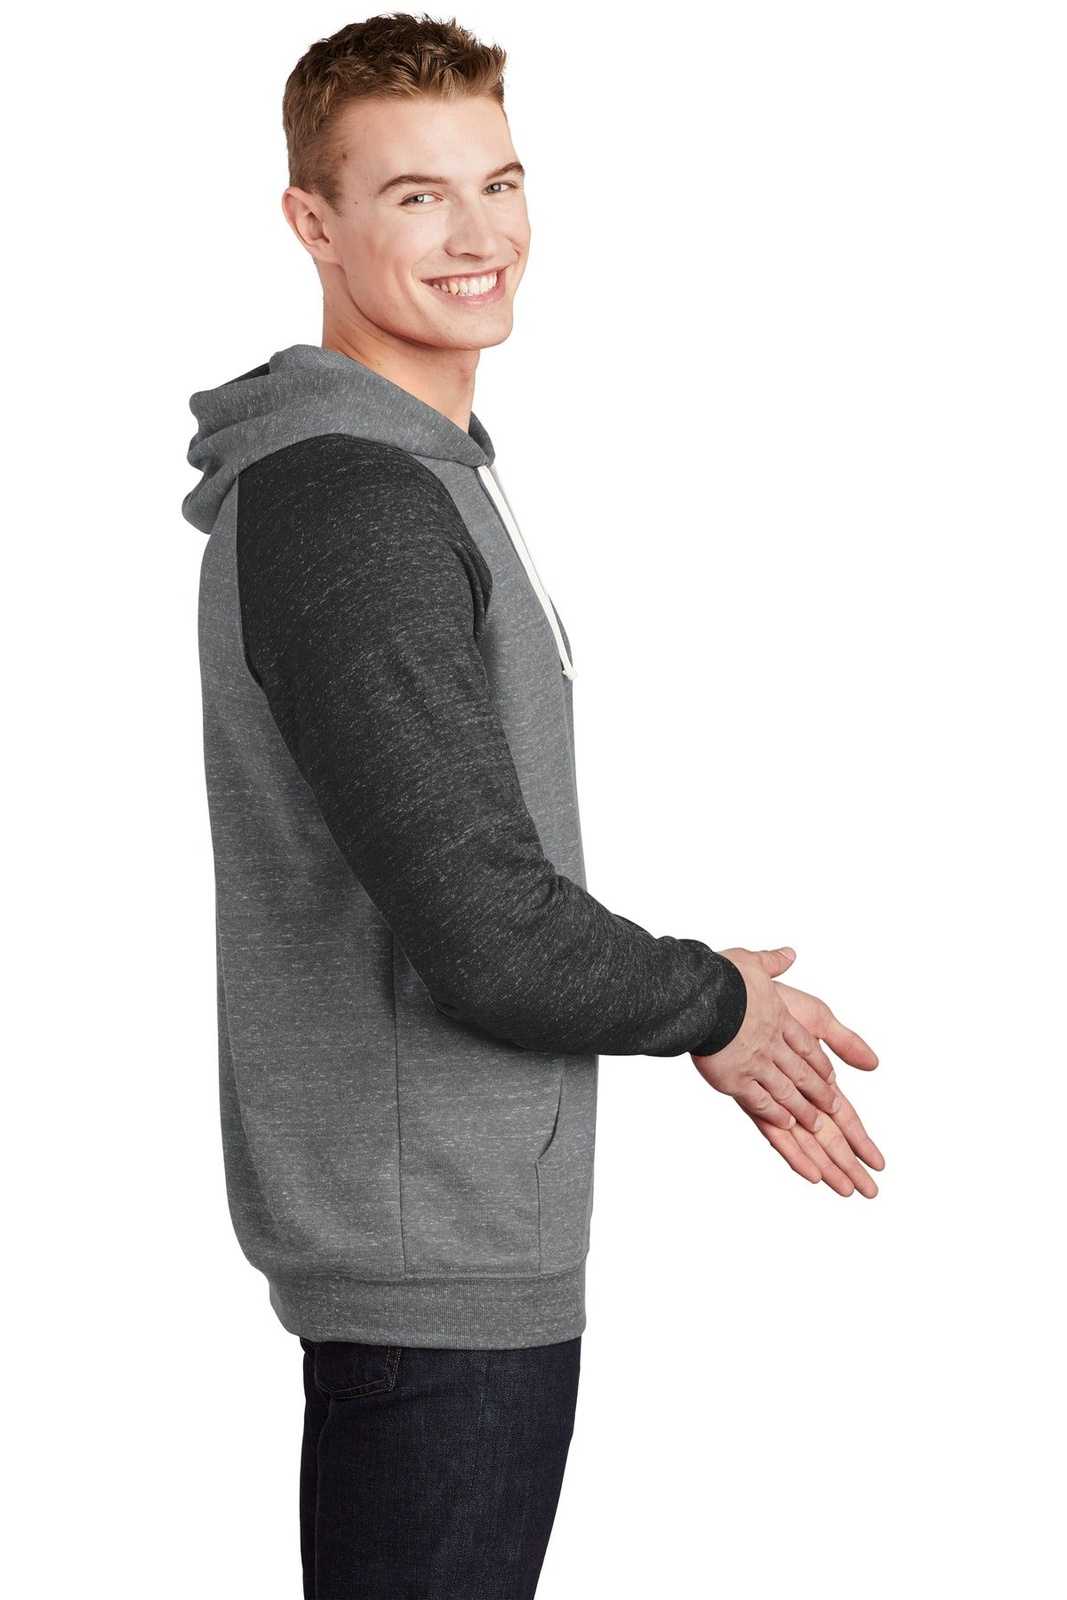 Jerzees 90M Snow Heather French Terry Raglan Hoodie - Charcoal Black - HIT a Double